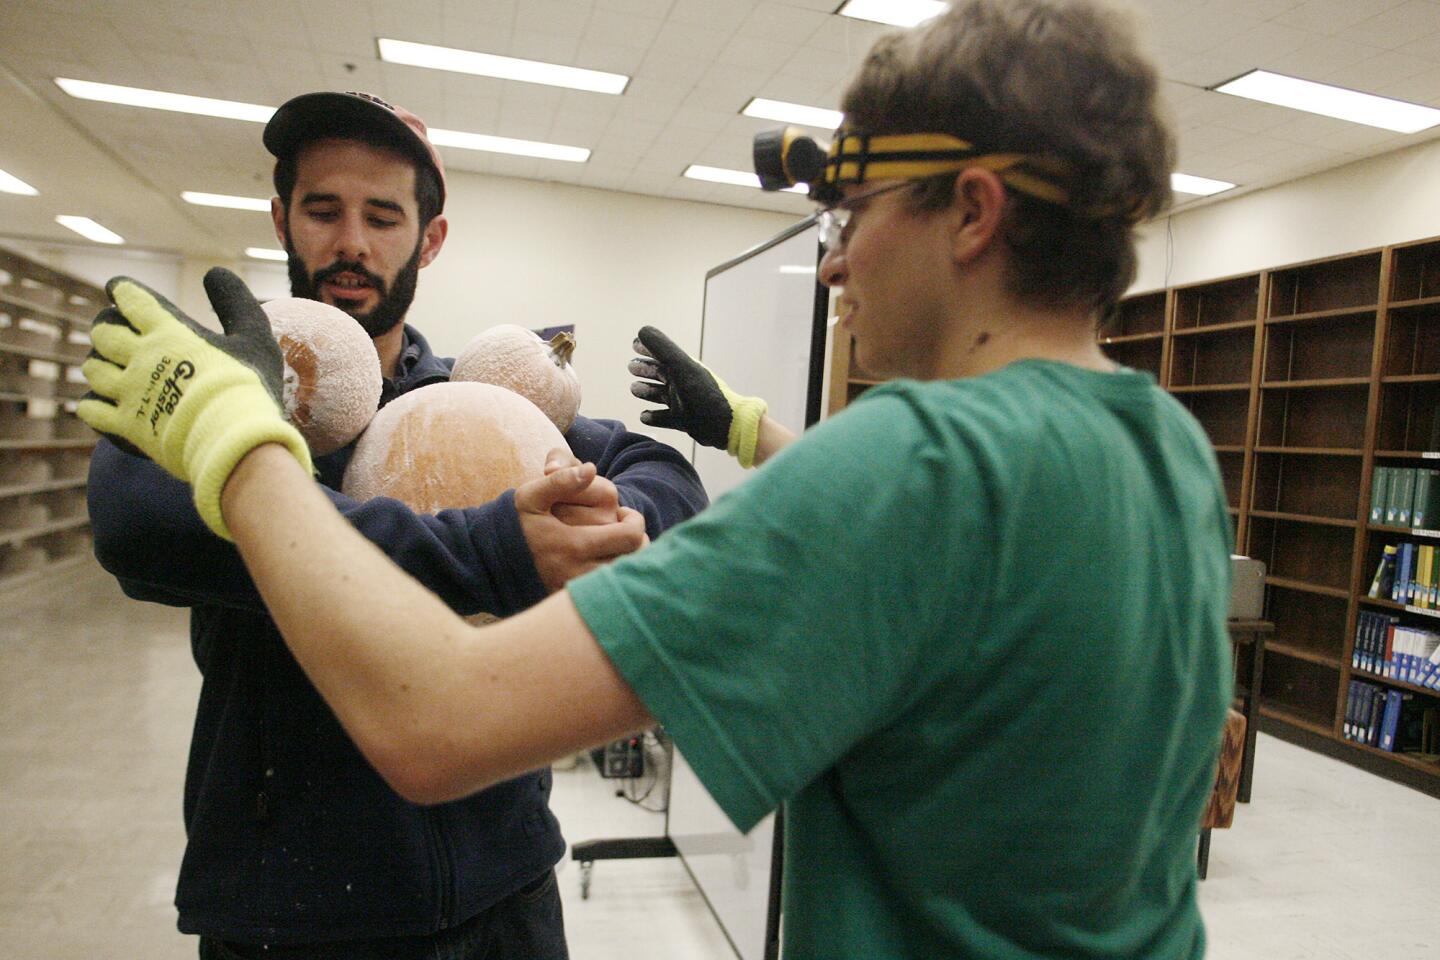 Nicholas Schiefer, right, helps Matt Coggon unload over 400 pumpkins during Caltech's Annual Halloween Pumpkin drop, which took place at the Caltech's Millikan Library in Pasadena on Wednesday, October 31, 2012.